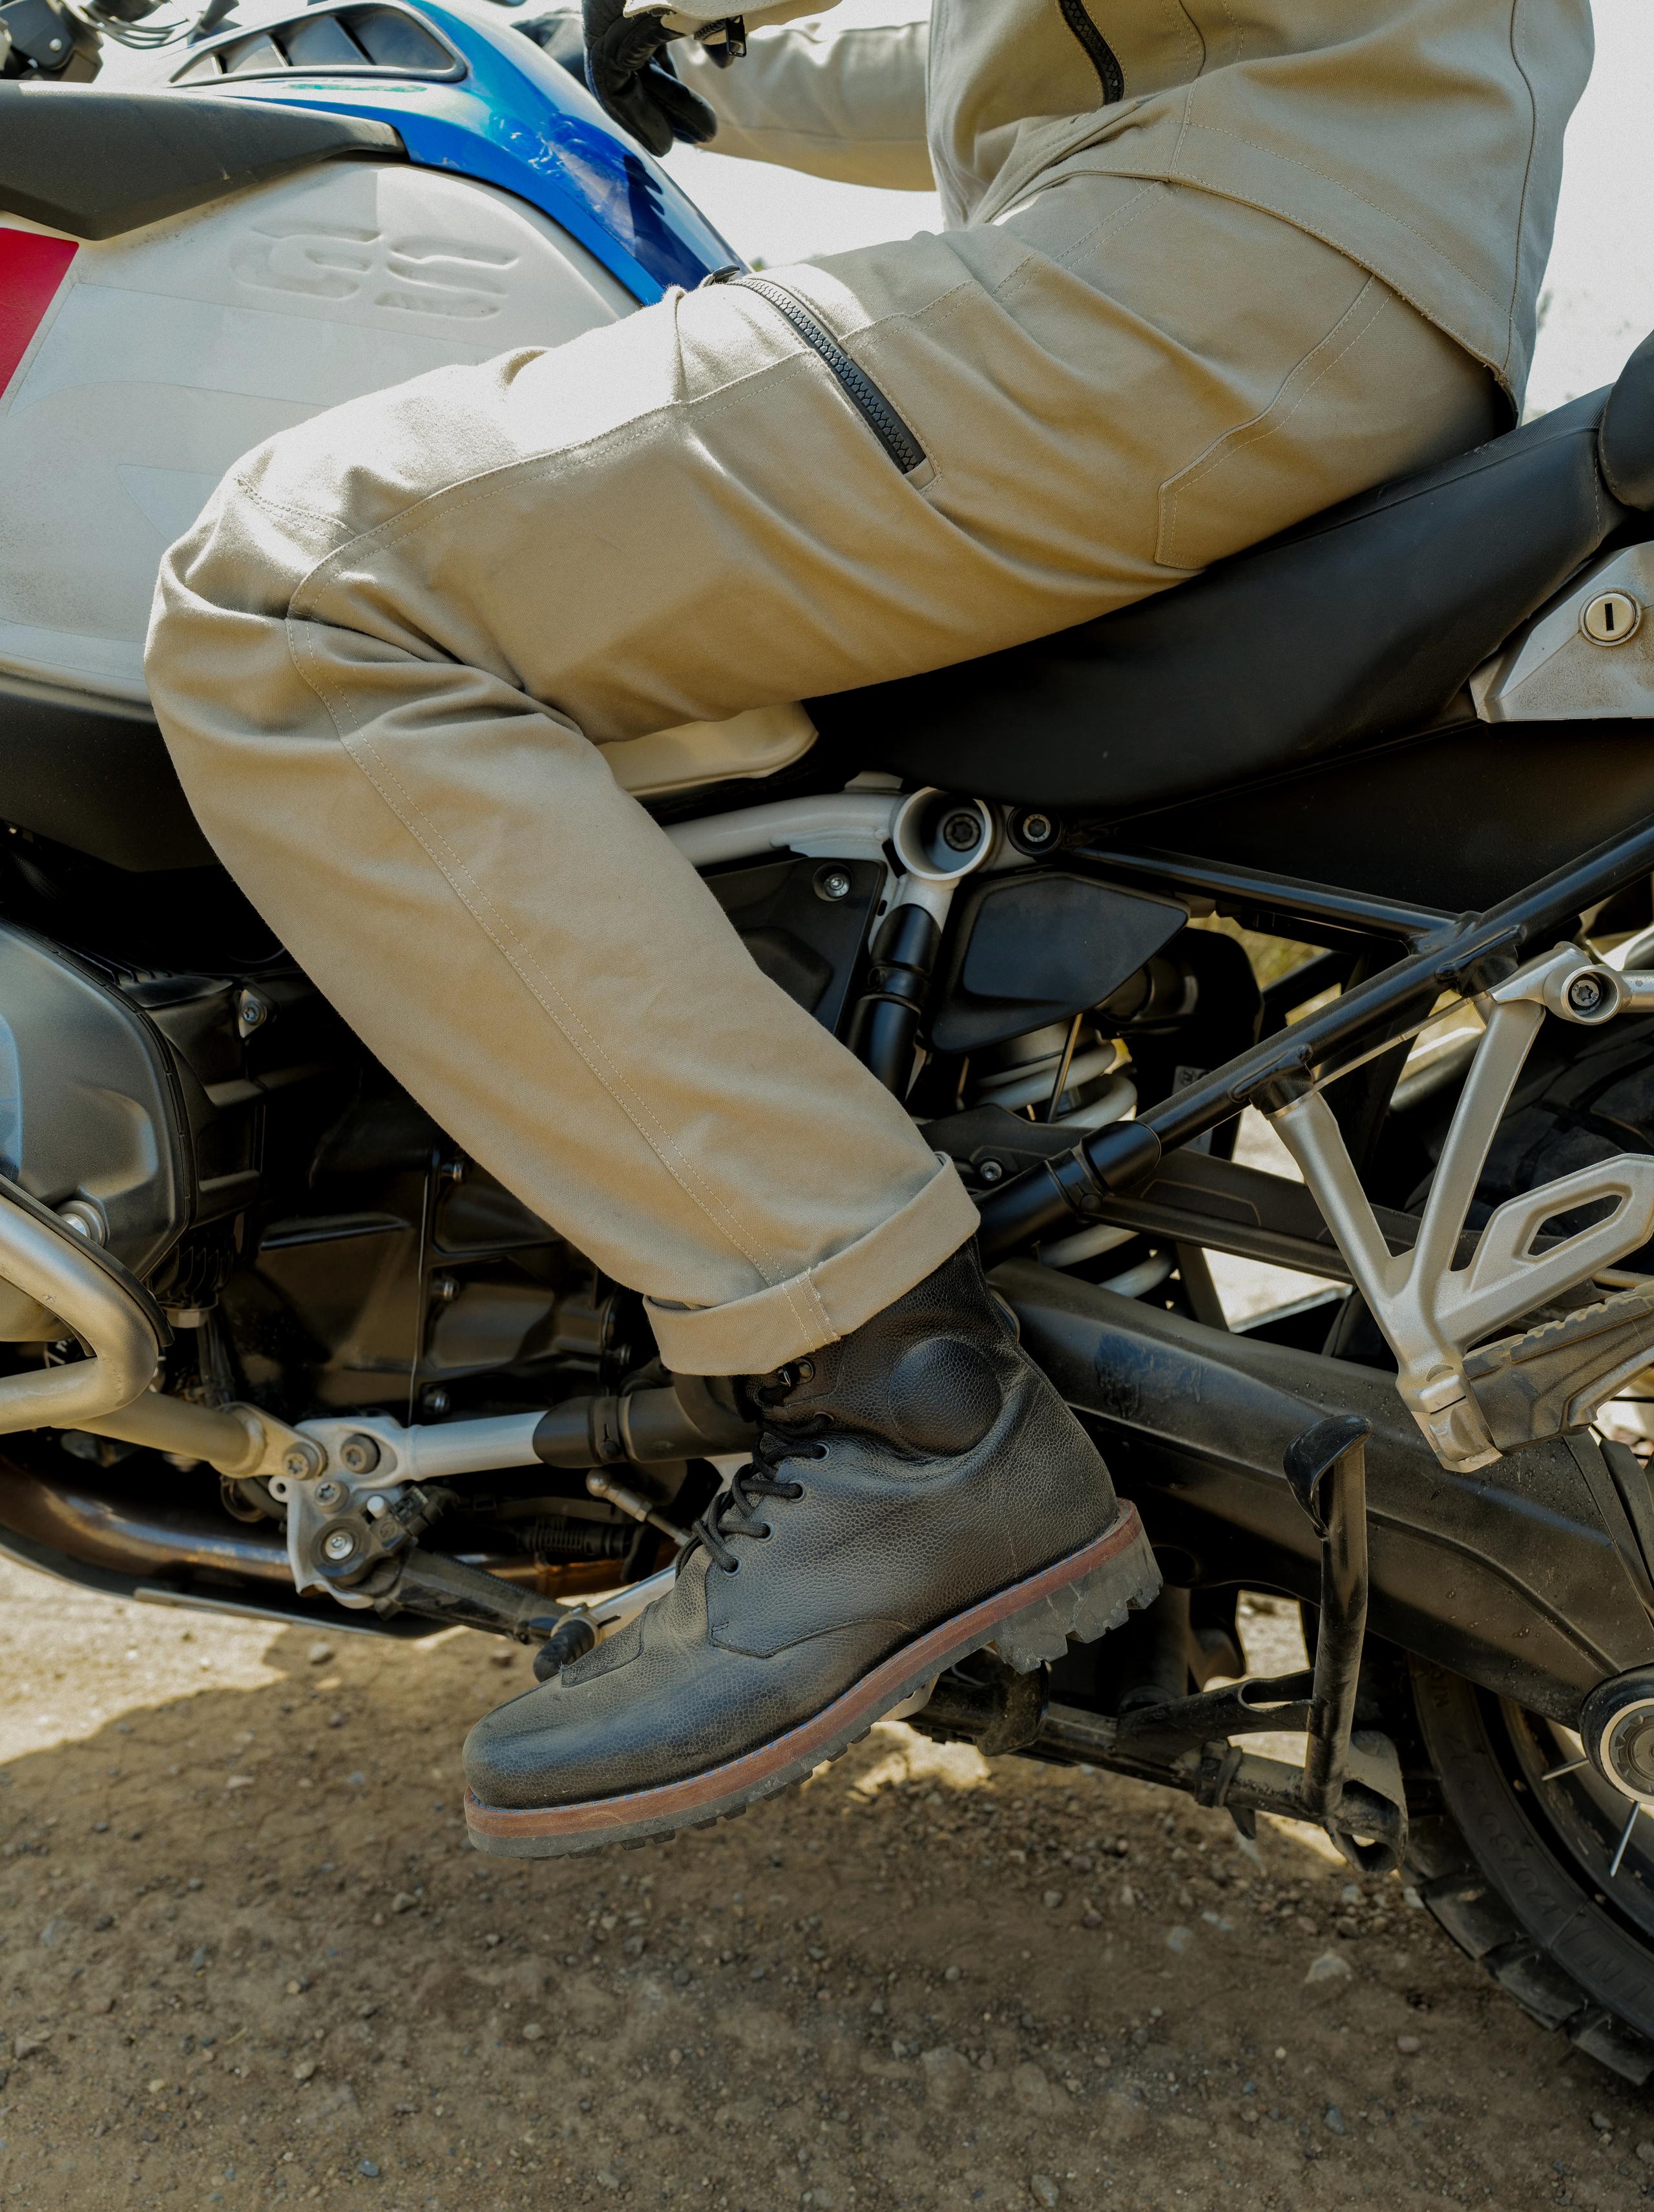 Closeup of motorcyclists' leg and boot on foot rest